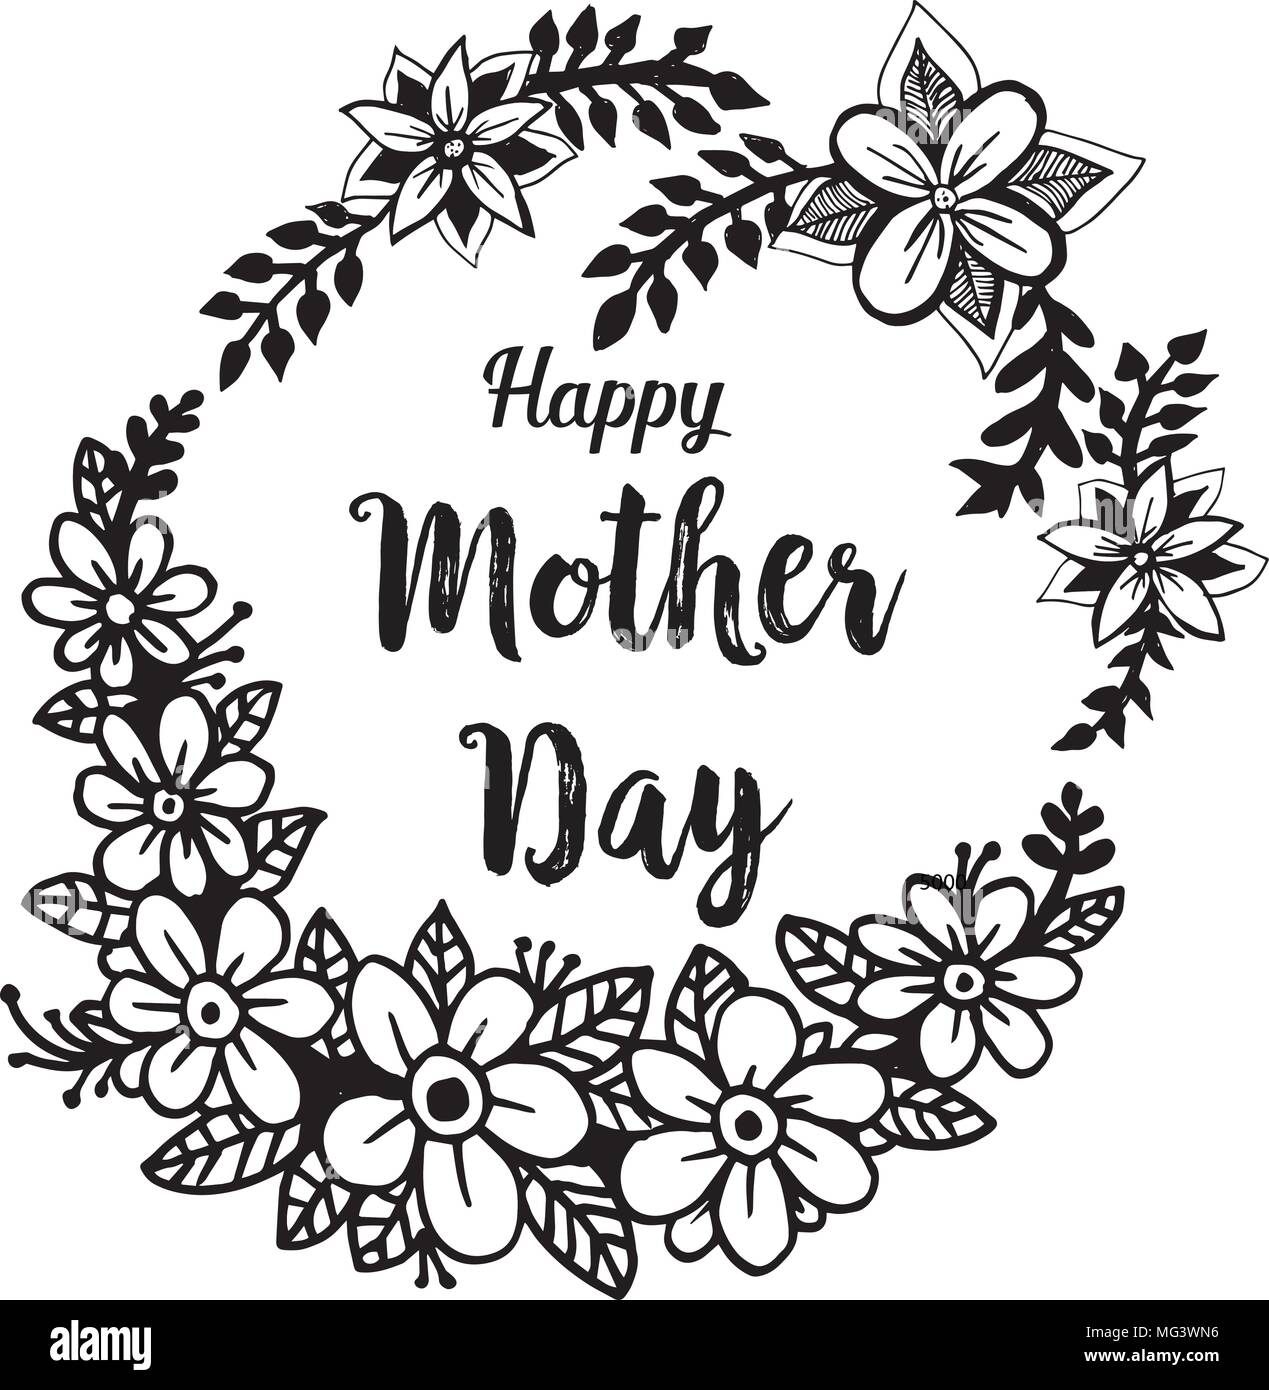 Top 999+ beautiful mothers day images – Amazing Collection beautiful mothers day images Full 4K